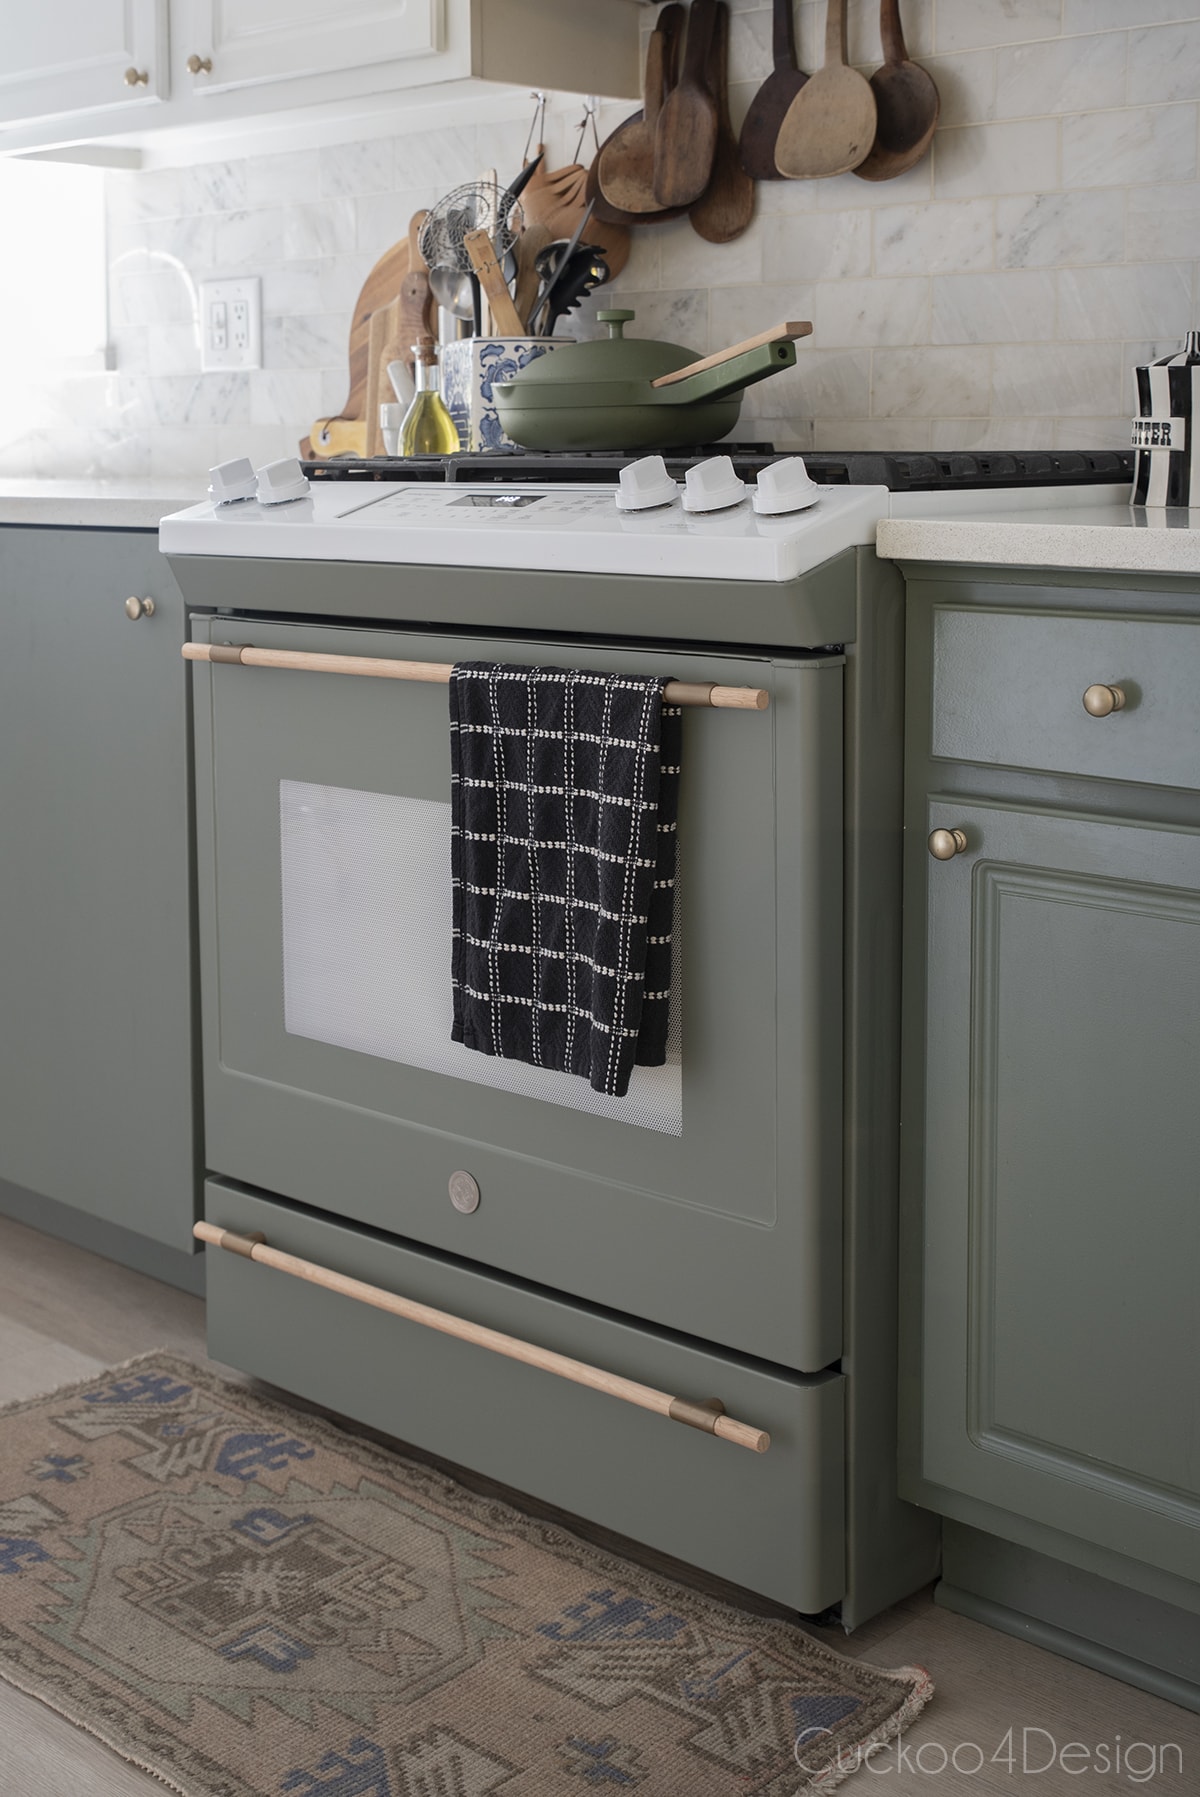 olive green stove makeover close-up